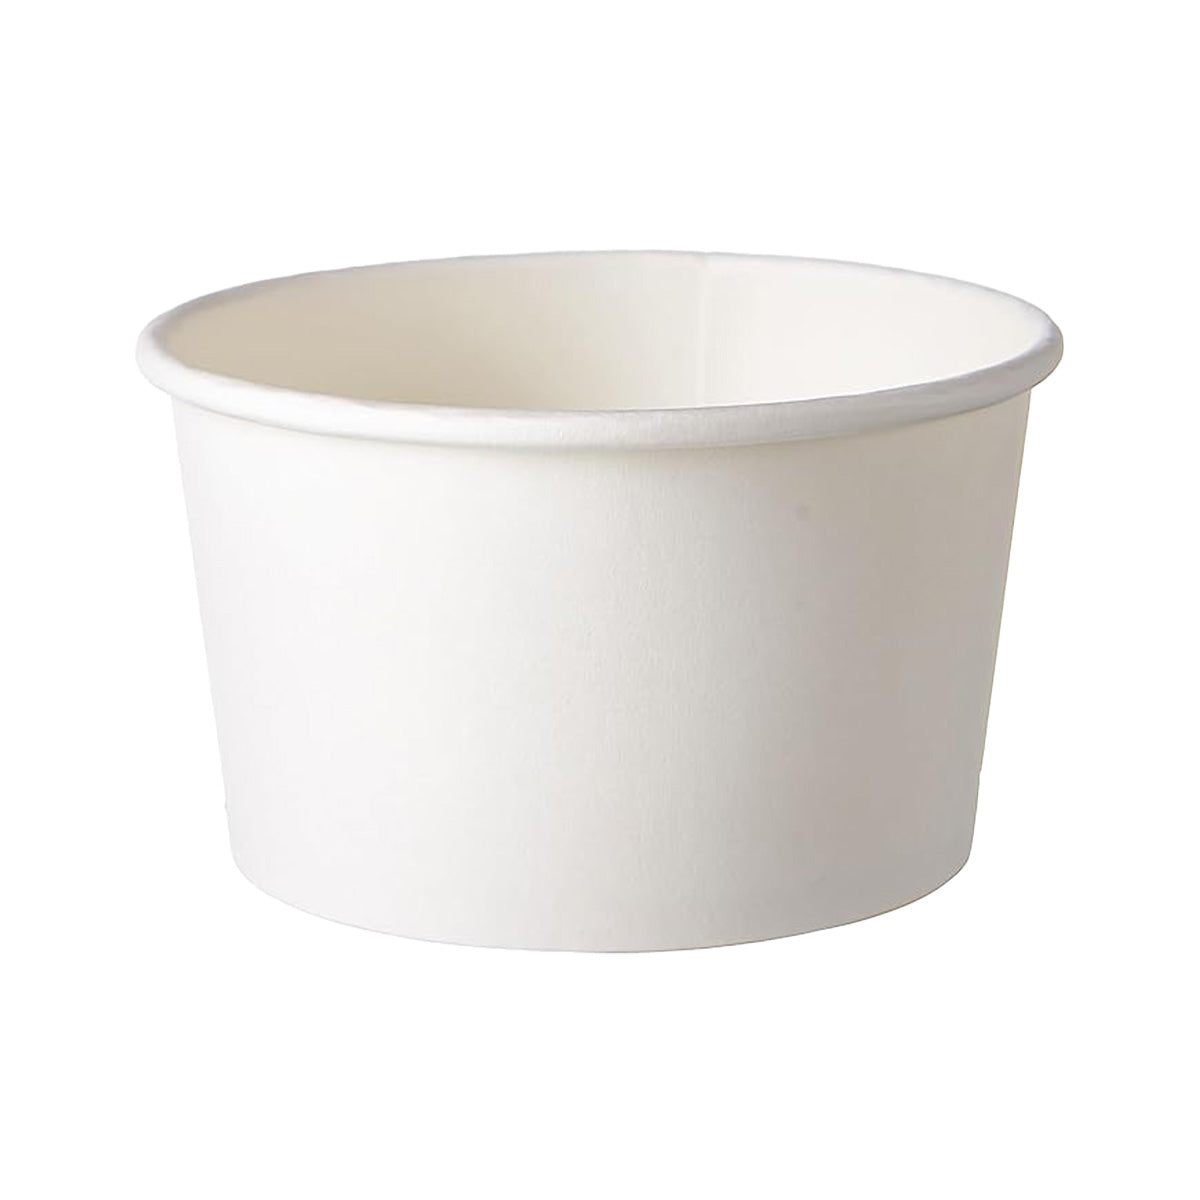 CIAO! 12OZ Disposable White Paper Food Container (500/case)